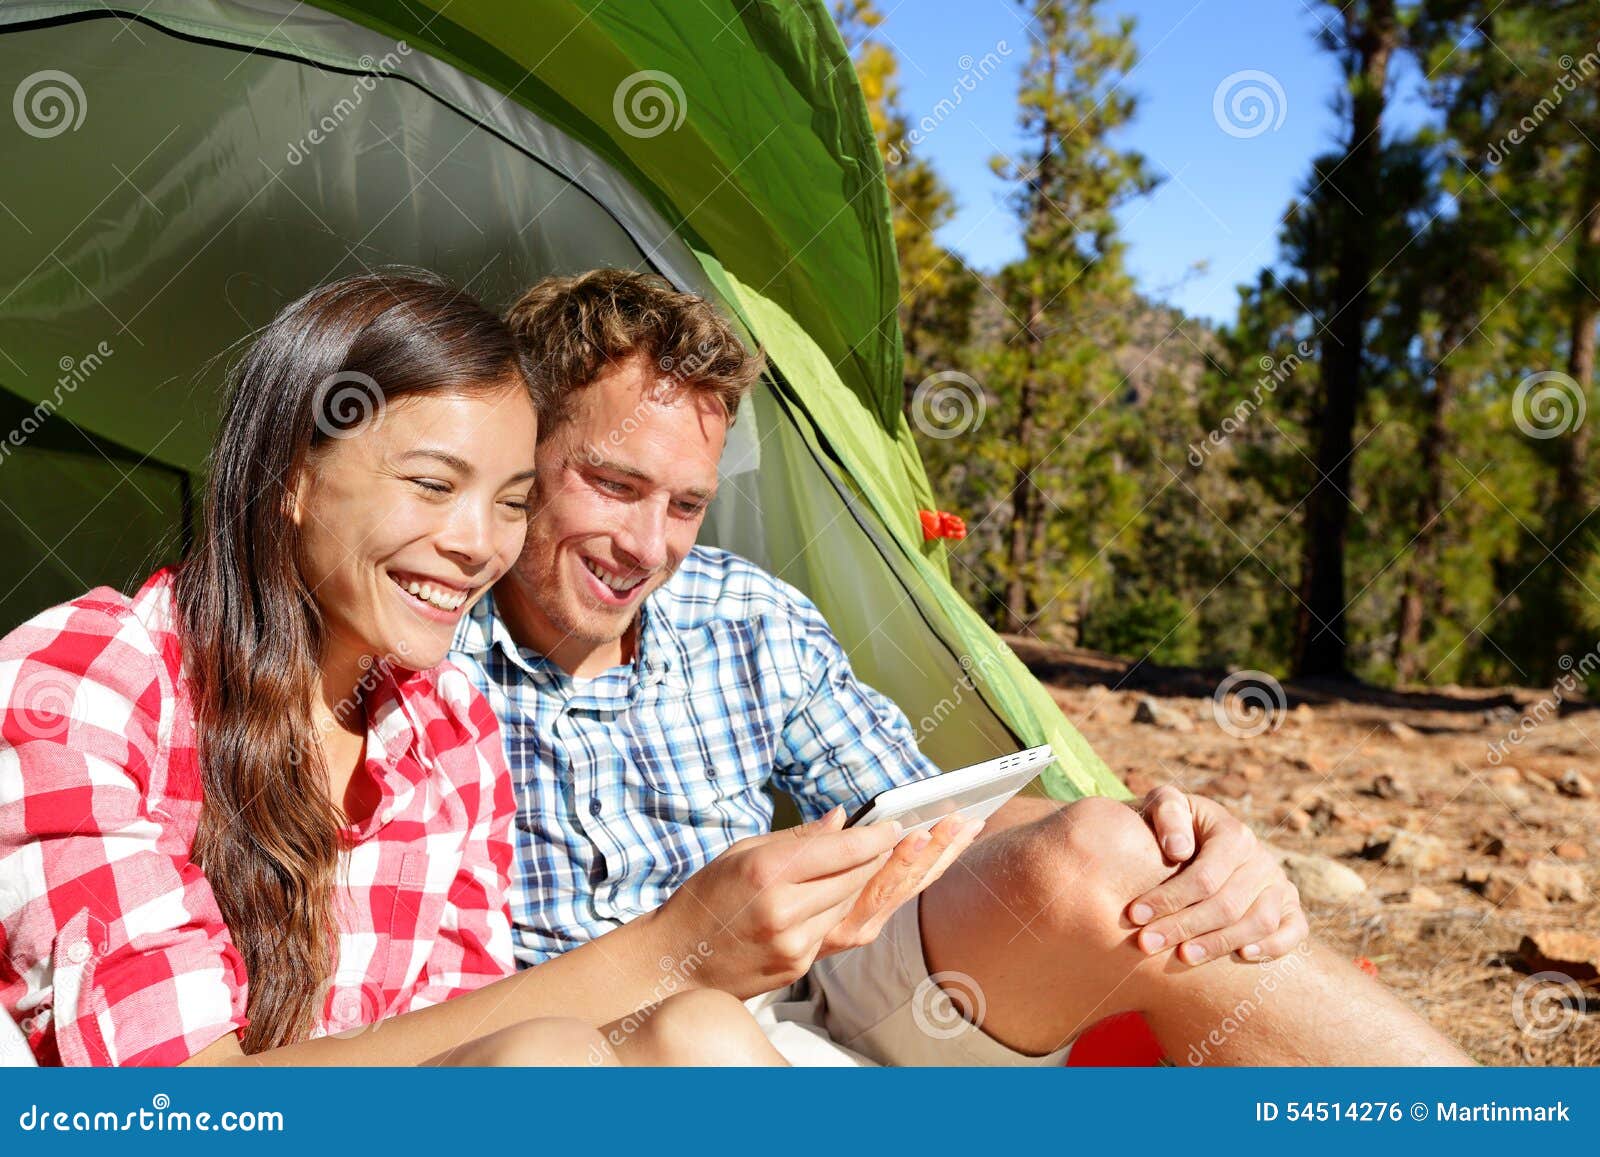 Camping Couple In Tent Using Smartphone Stock Photo Image 54